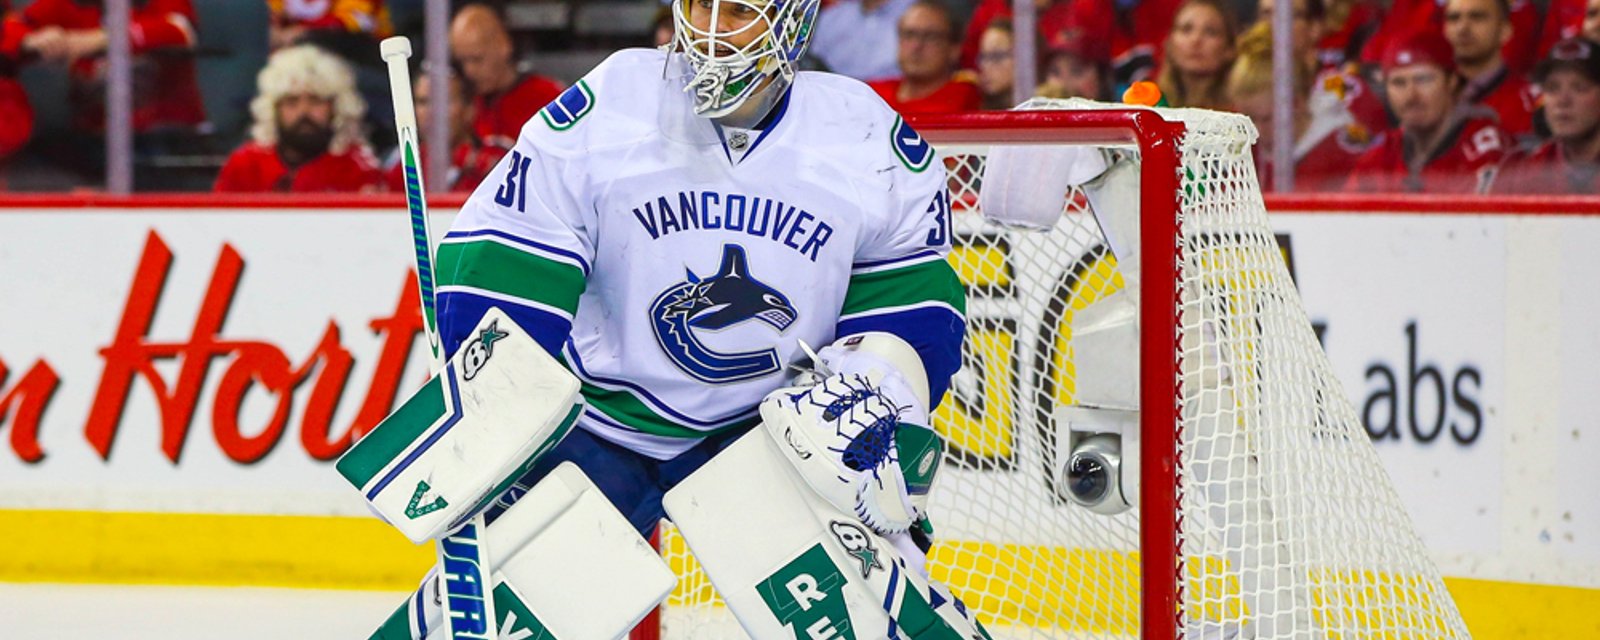 Eddie Lack officially retires from professional hockey